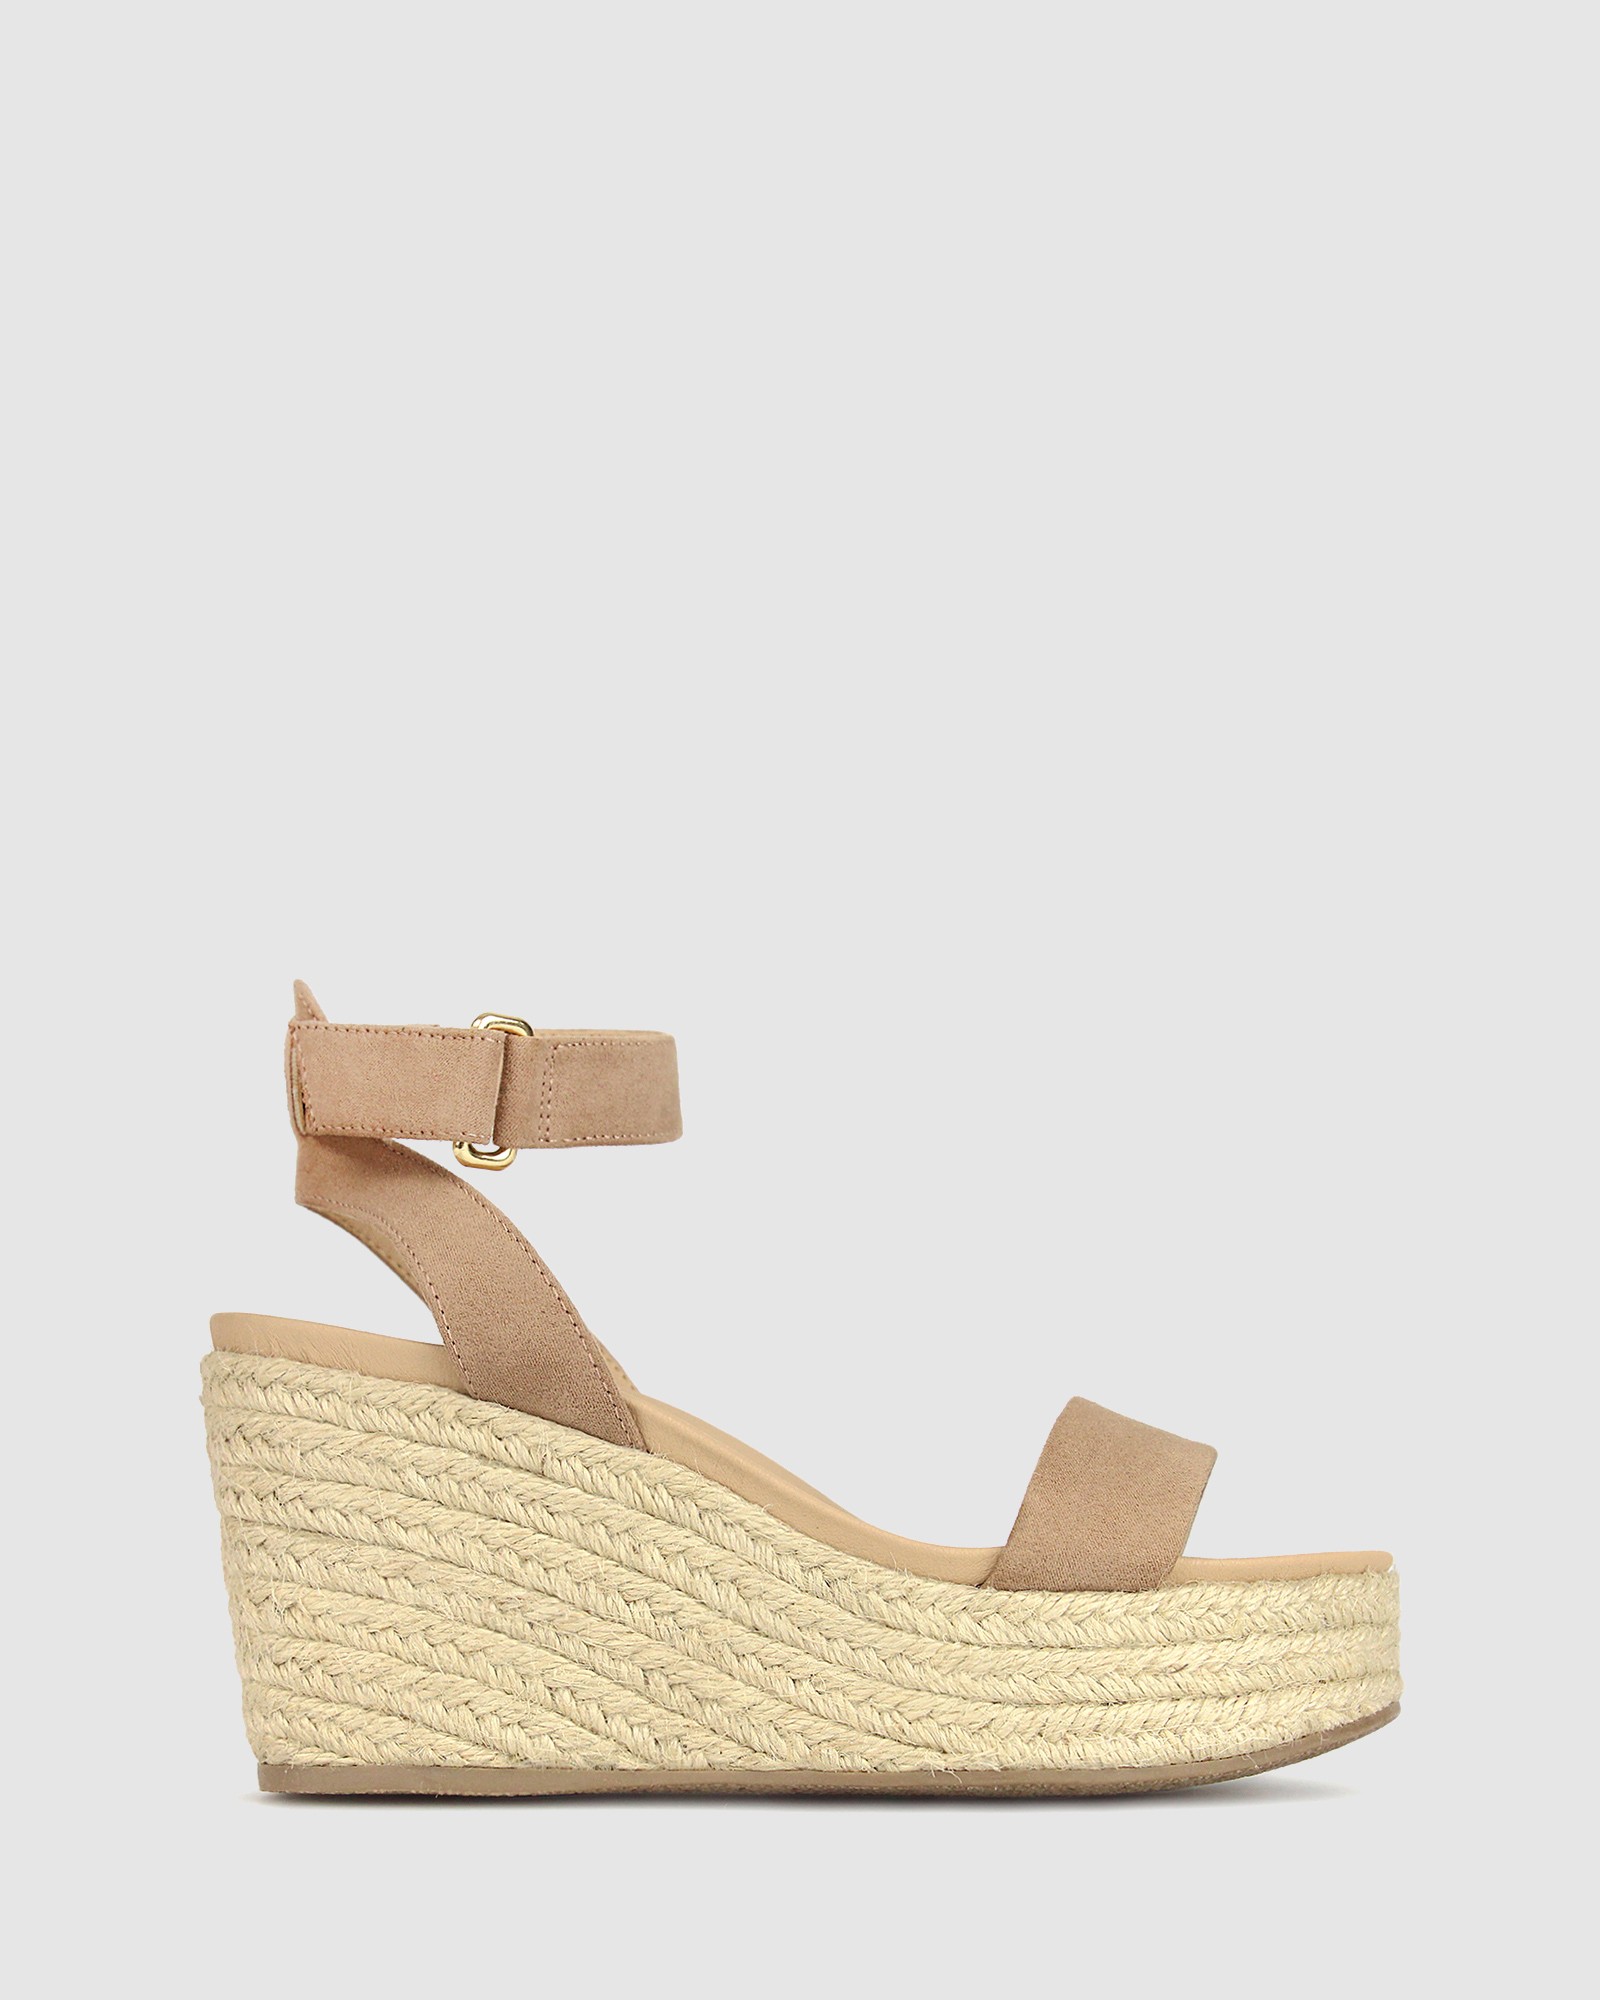 Kayla Wedge Sandals Blush by Betts | ShoeSales